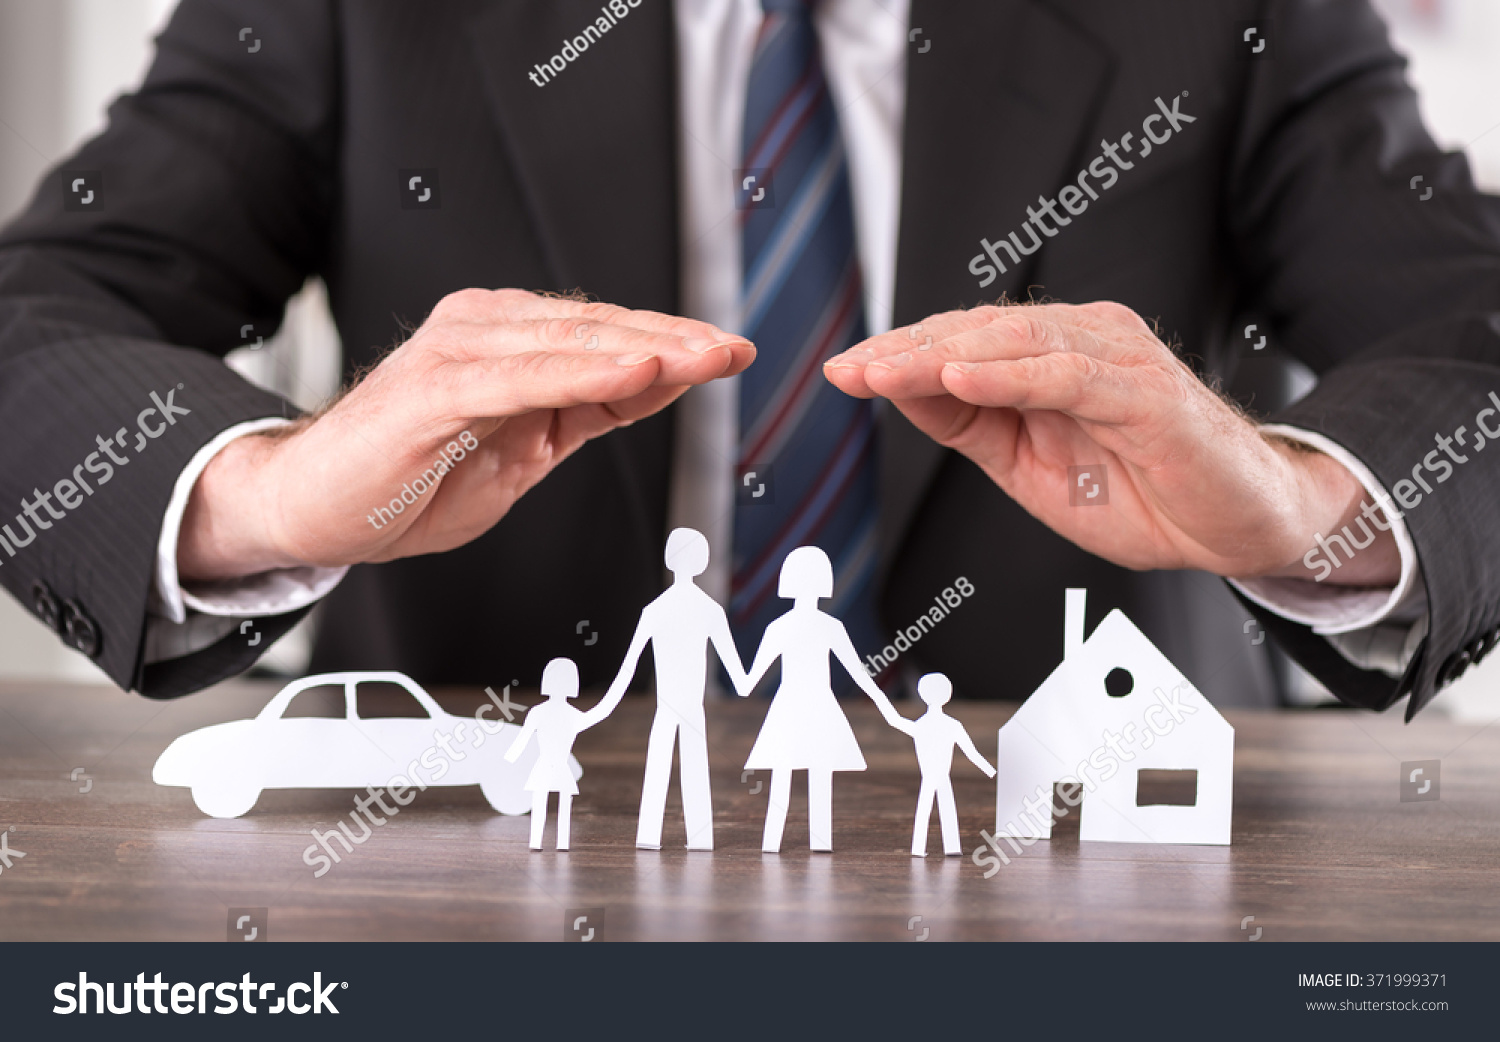 stock-photo-concept-of-insurance-with-hands-over-a-house-a-car-and-a-family-371999371.jpg